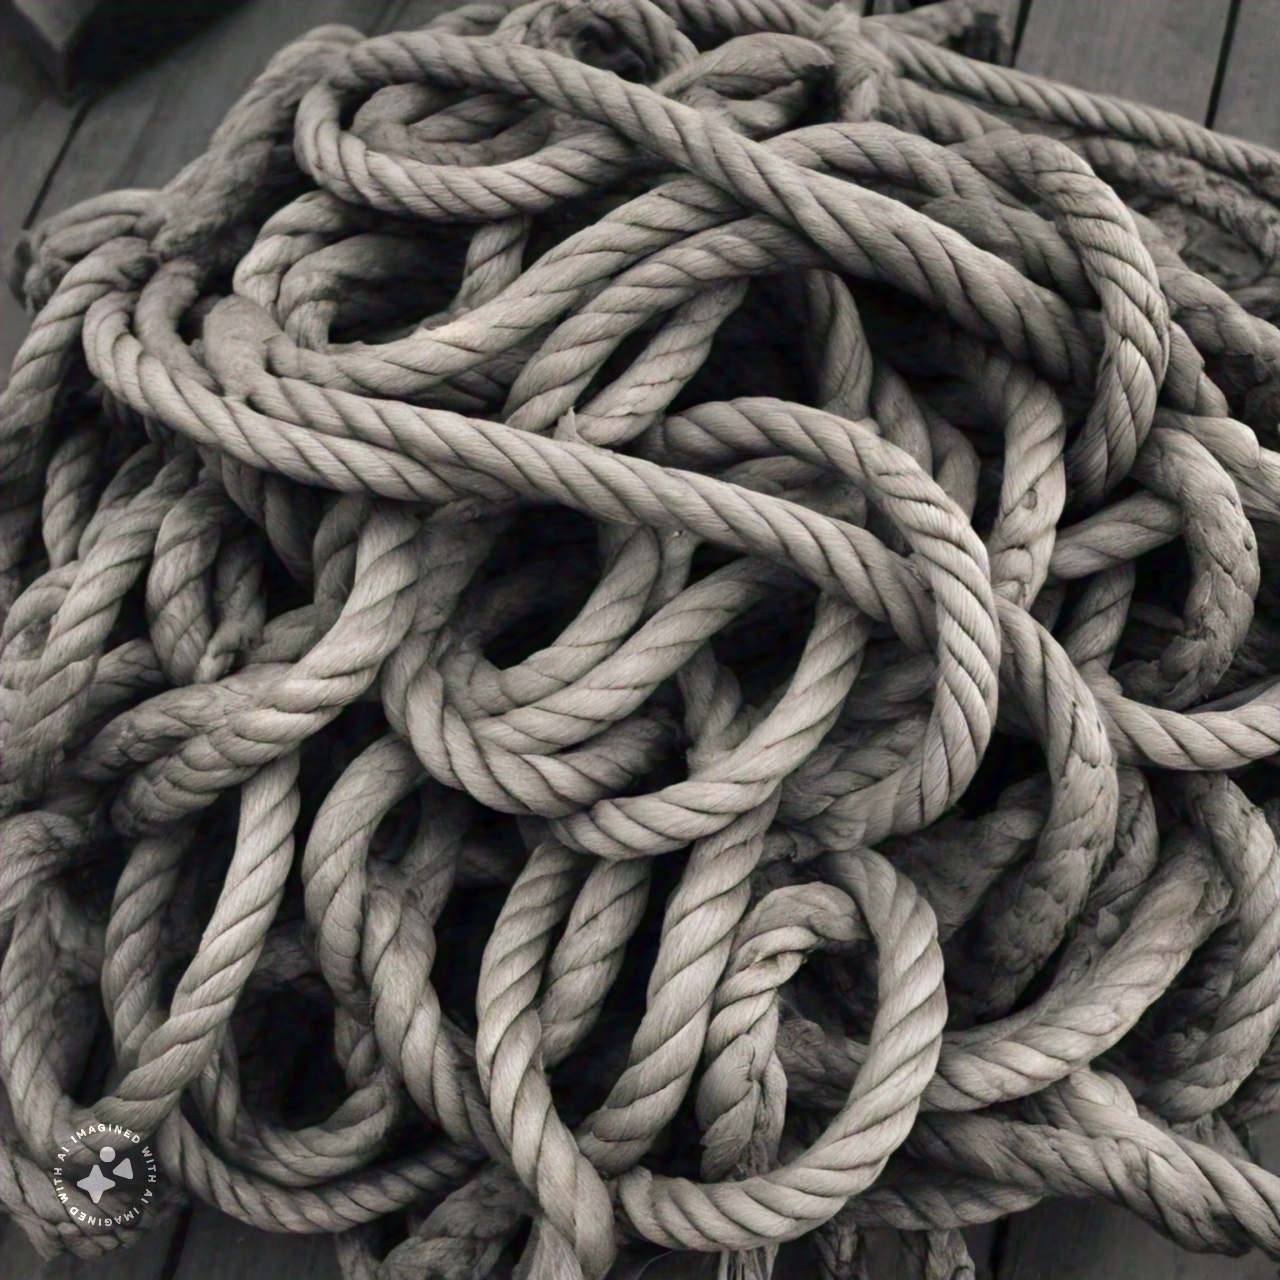 knotted up ropes